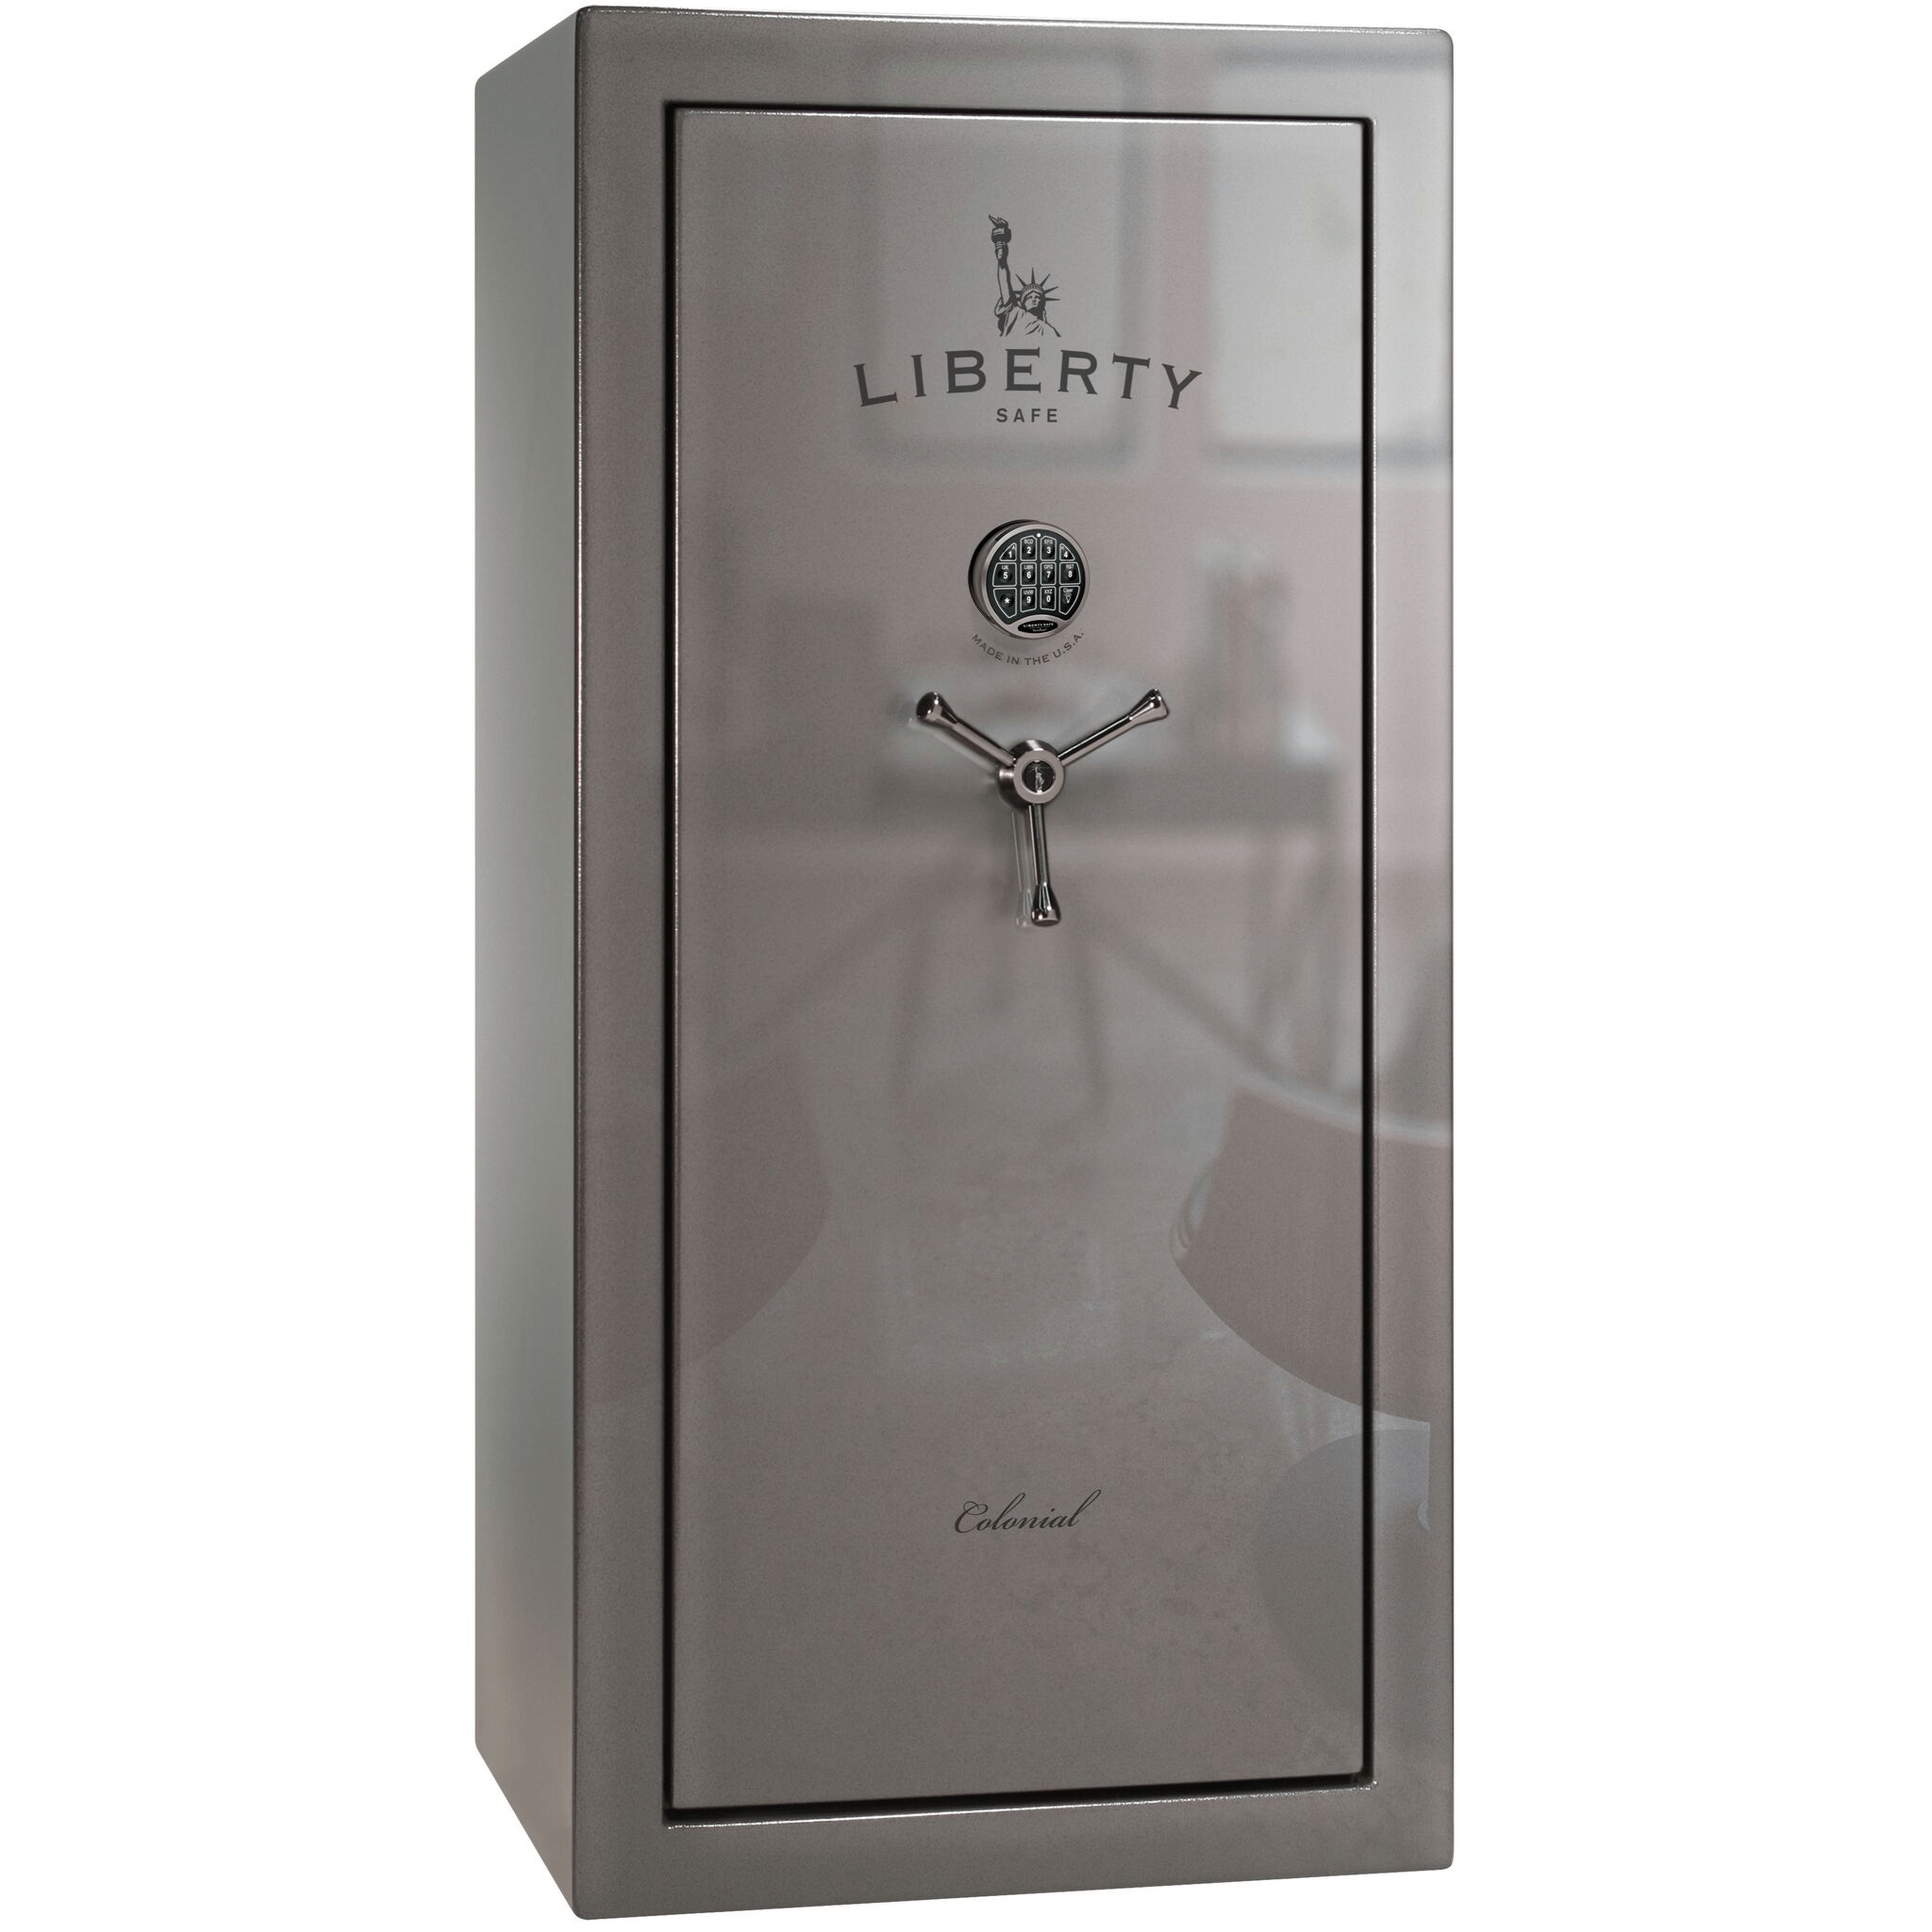 Colonial Series | Level 3 Security | 75 Minute Fire Protection | 30 | DIMENSIONS: 60.5"(H) X 36"(W) X 25"(D) | Black Gloss | Electronic Lock